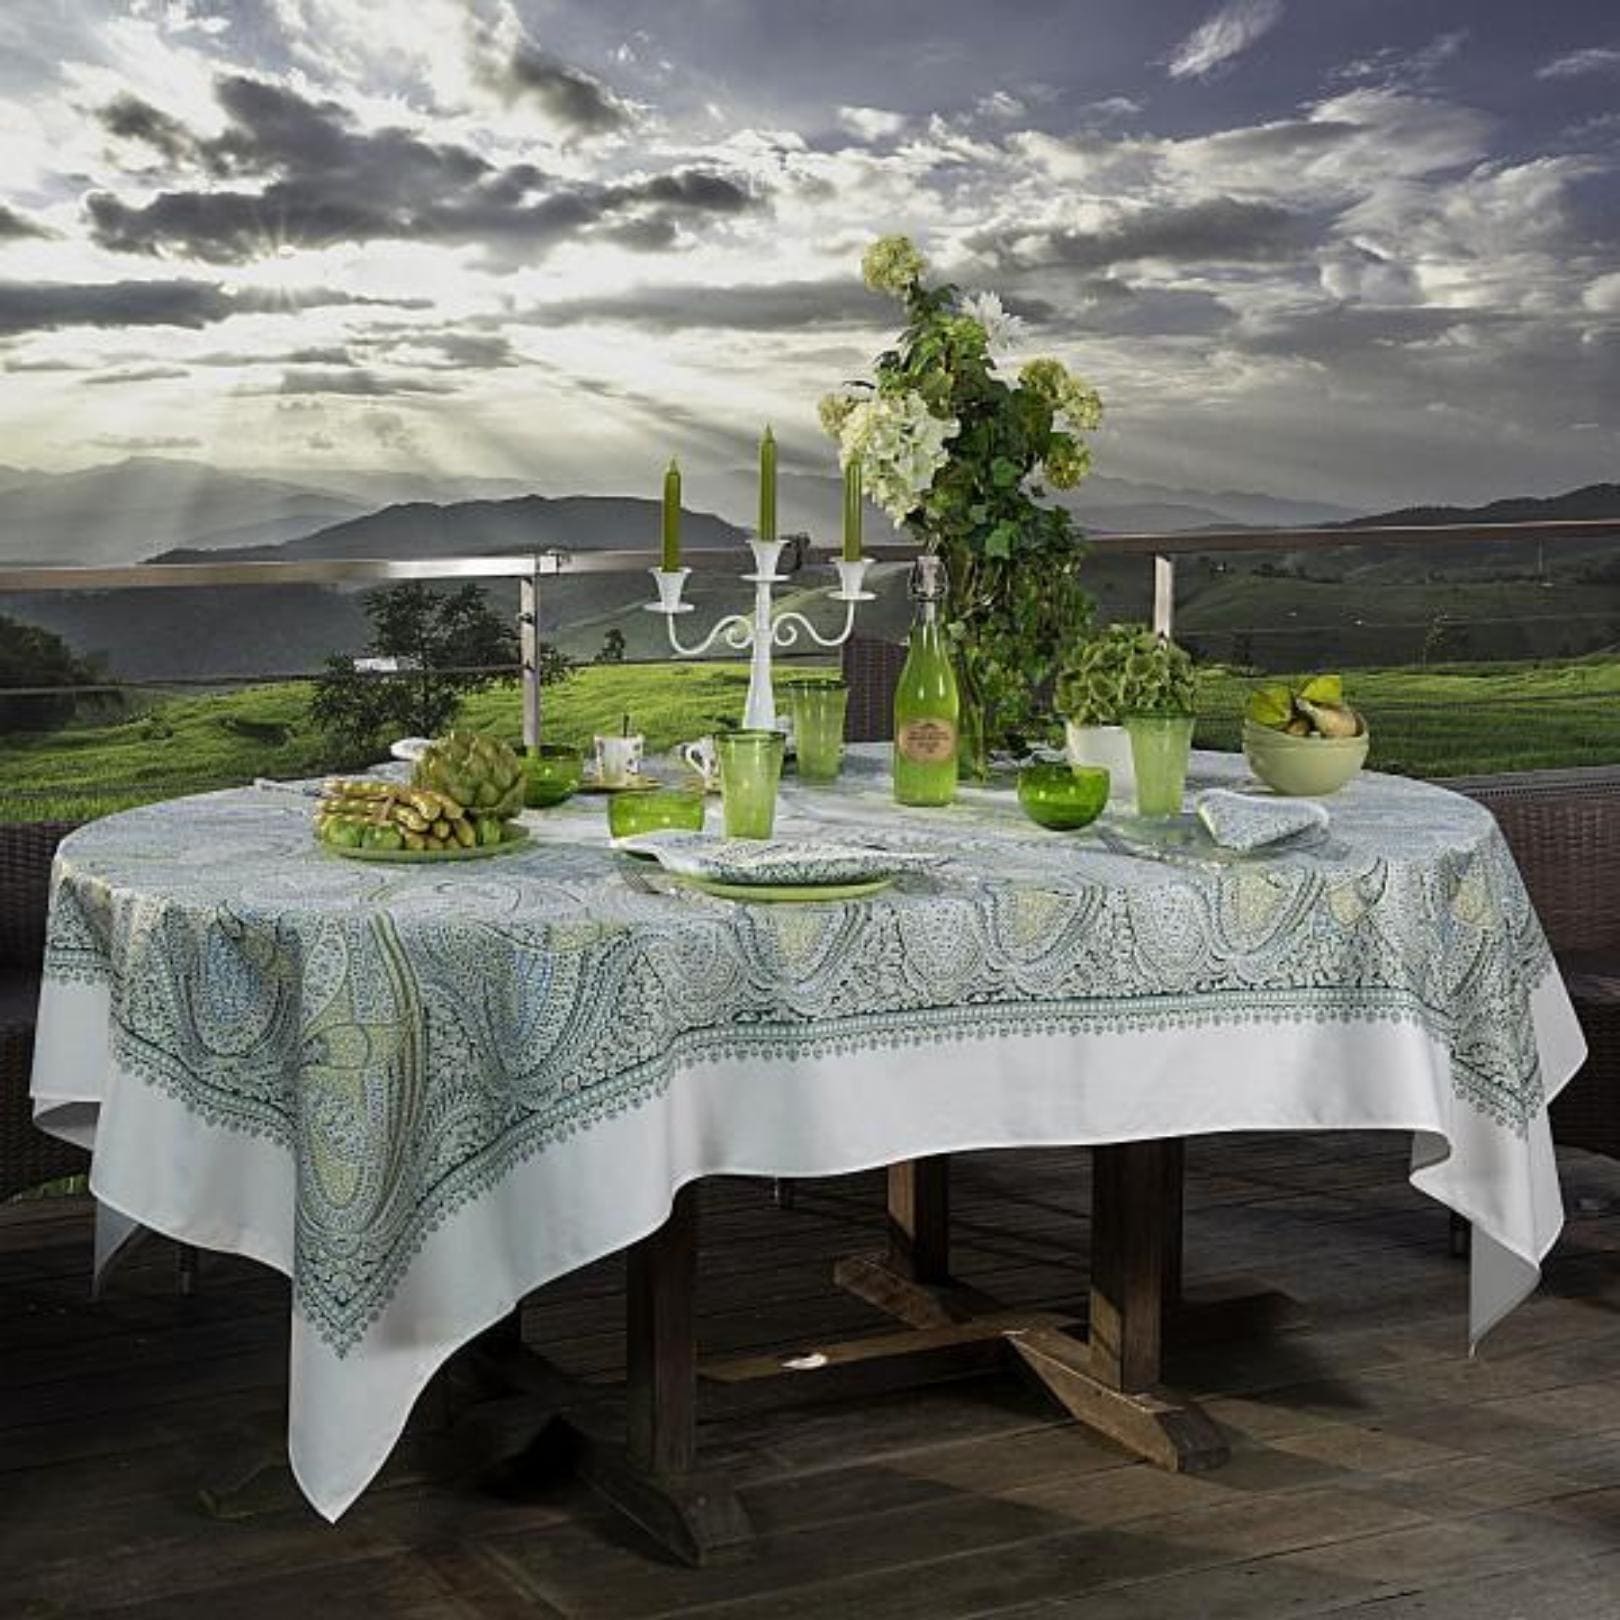 Tablecloth Ceylan 2 lime green 170×170 cm Beauville